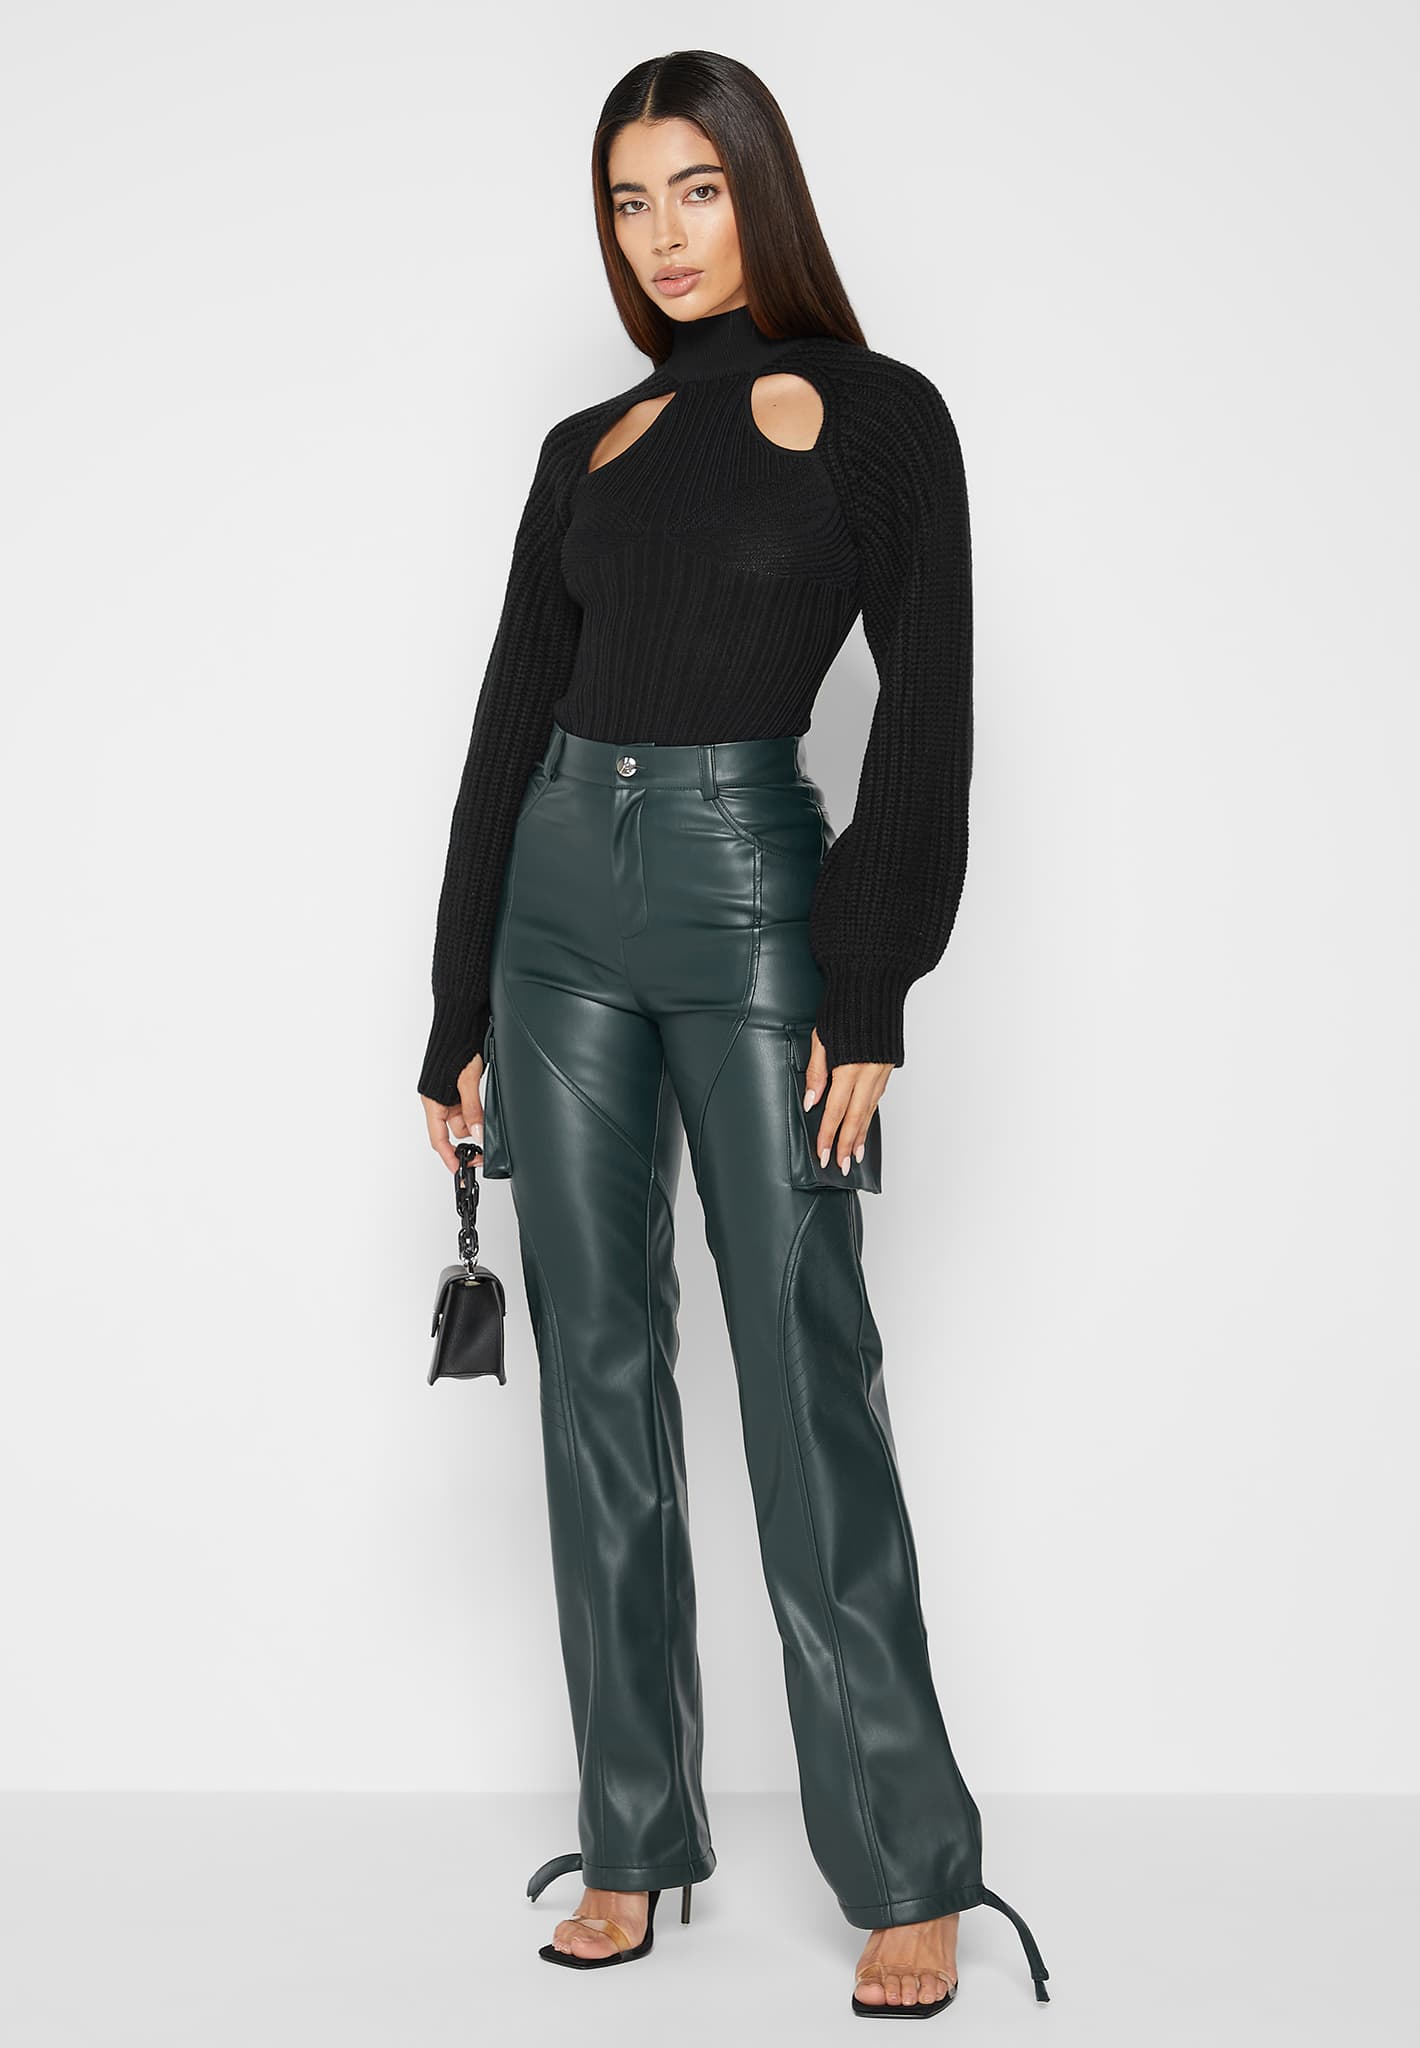 RSVP by Nykaa Fashion Black Solid Straight Fit Faux Leather Pants Buy RSVP  by Nykaa Fashion Black Solid Straight Fit Faux Leather Pants Online at Best  Price in India  Nykaa